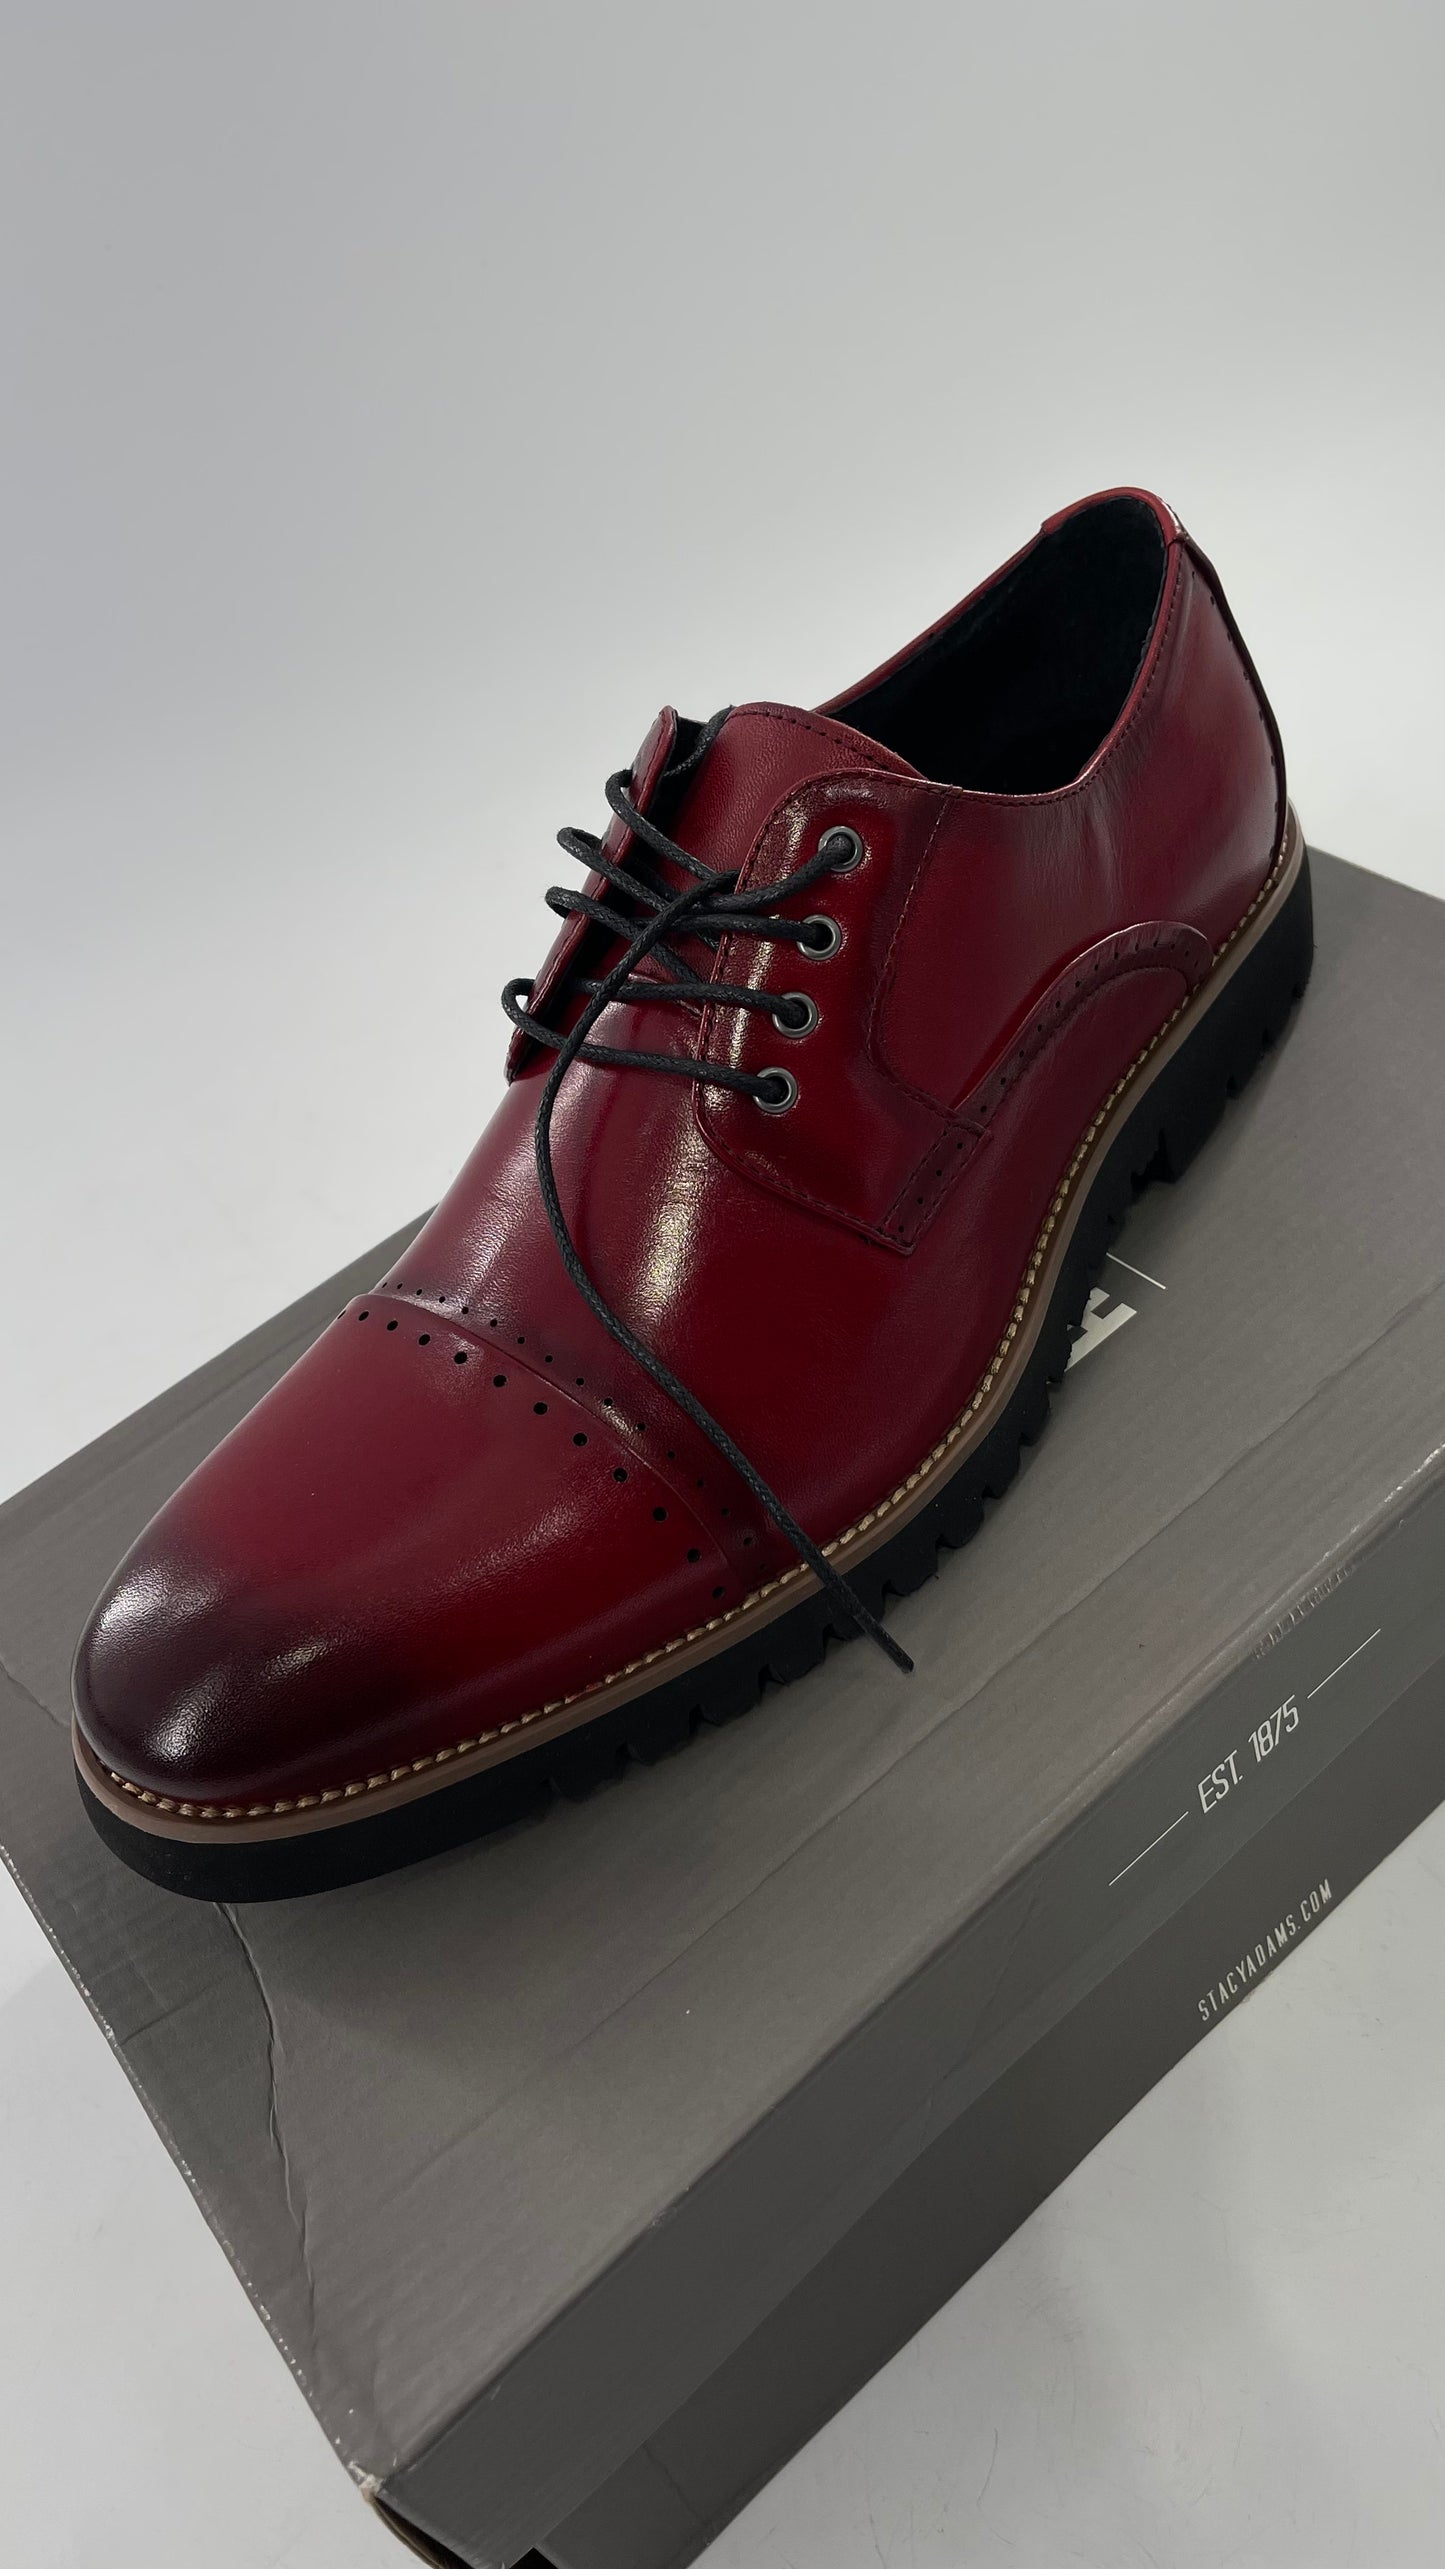 Stacy Adam’s Cherry Red Leather Oxfords with Cap Toe Detail (10)